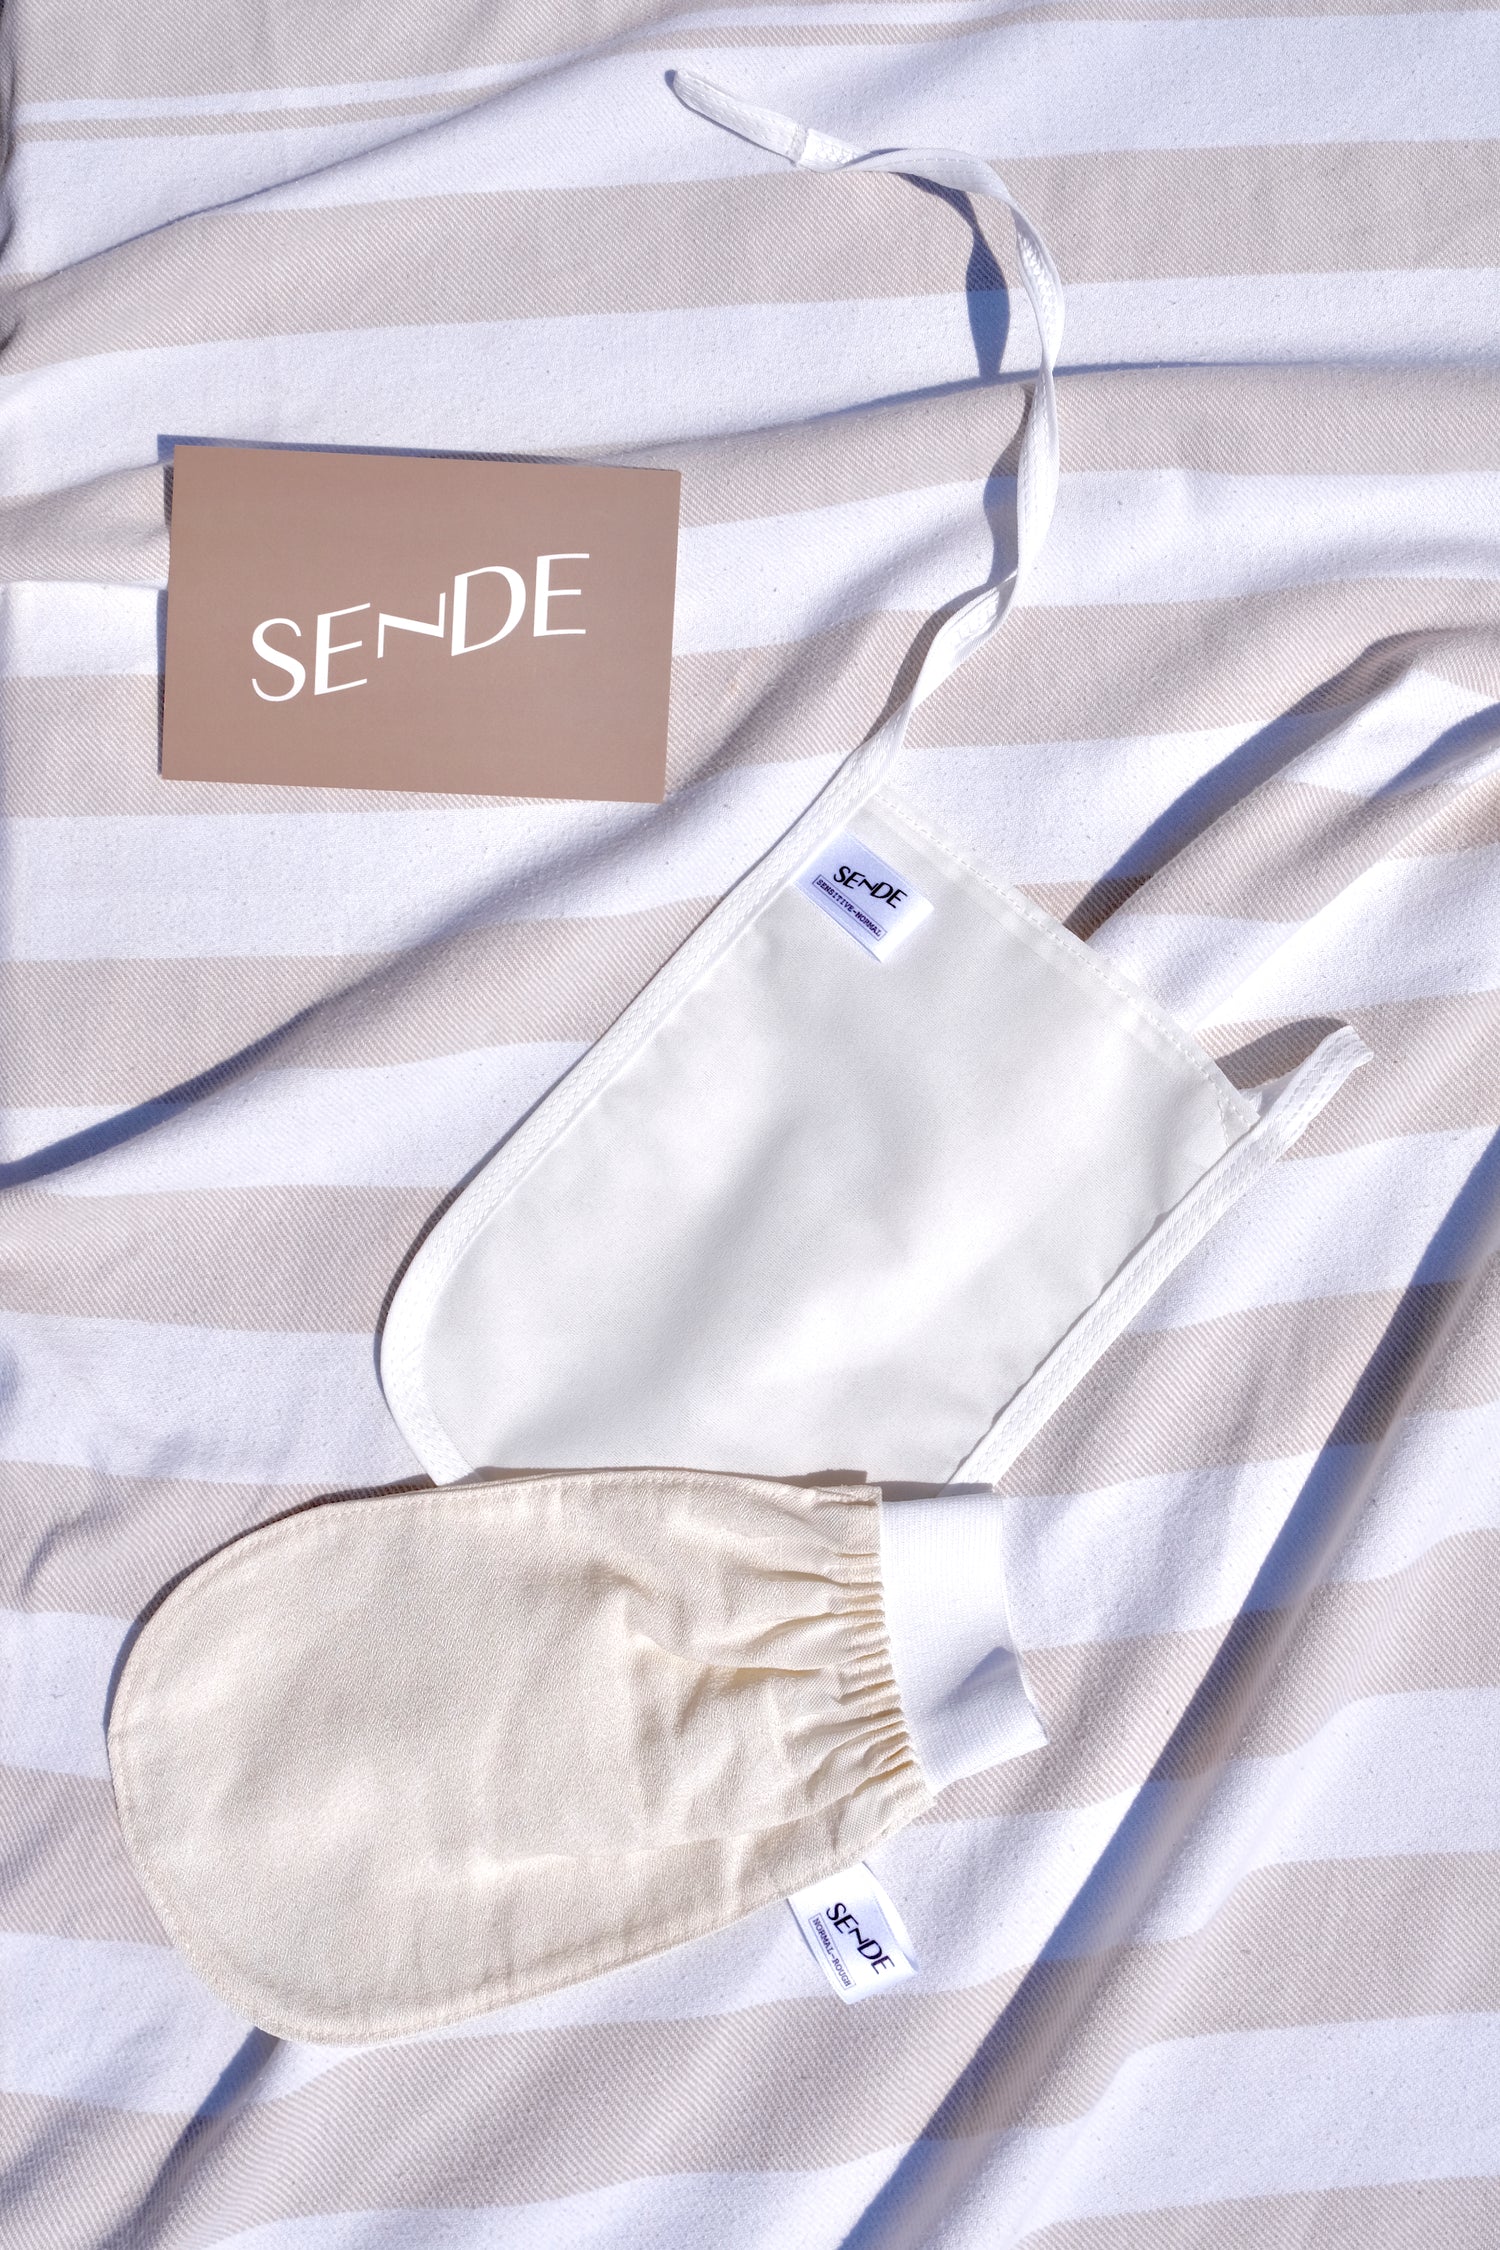 SENDE authentic Turkish body exfoliating keses and thank you post card atop their signature organic sand beige striped peshtemal towel